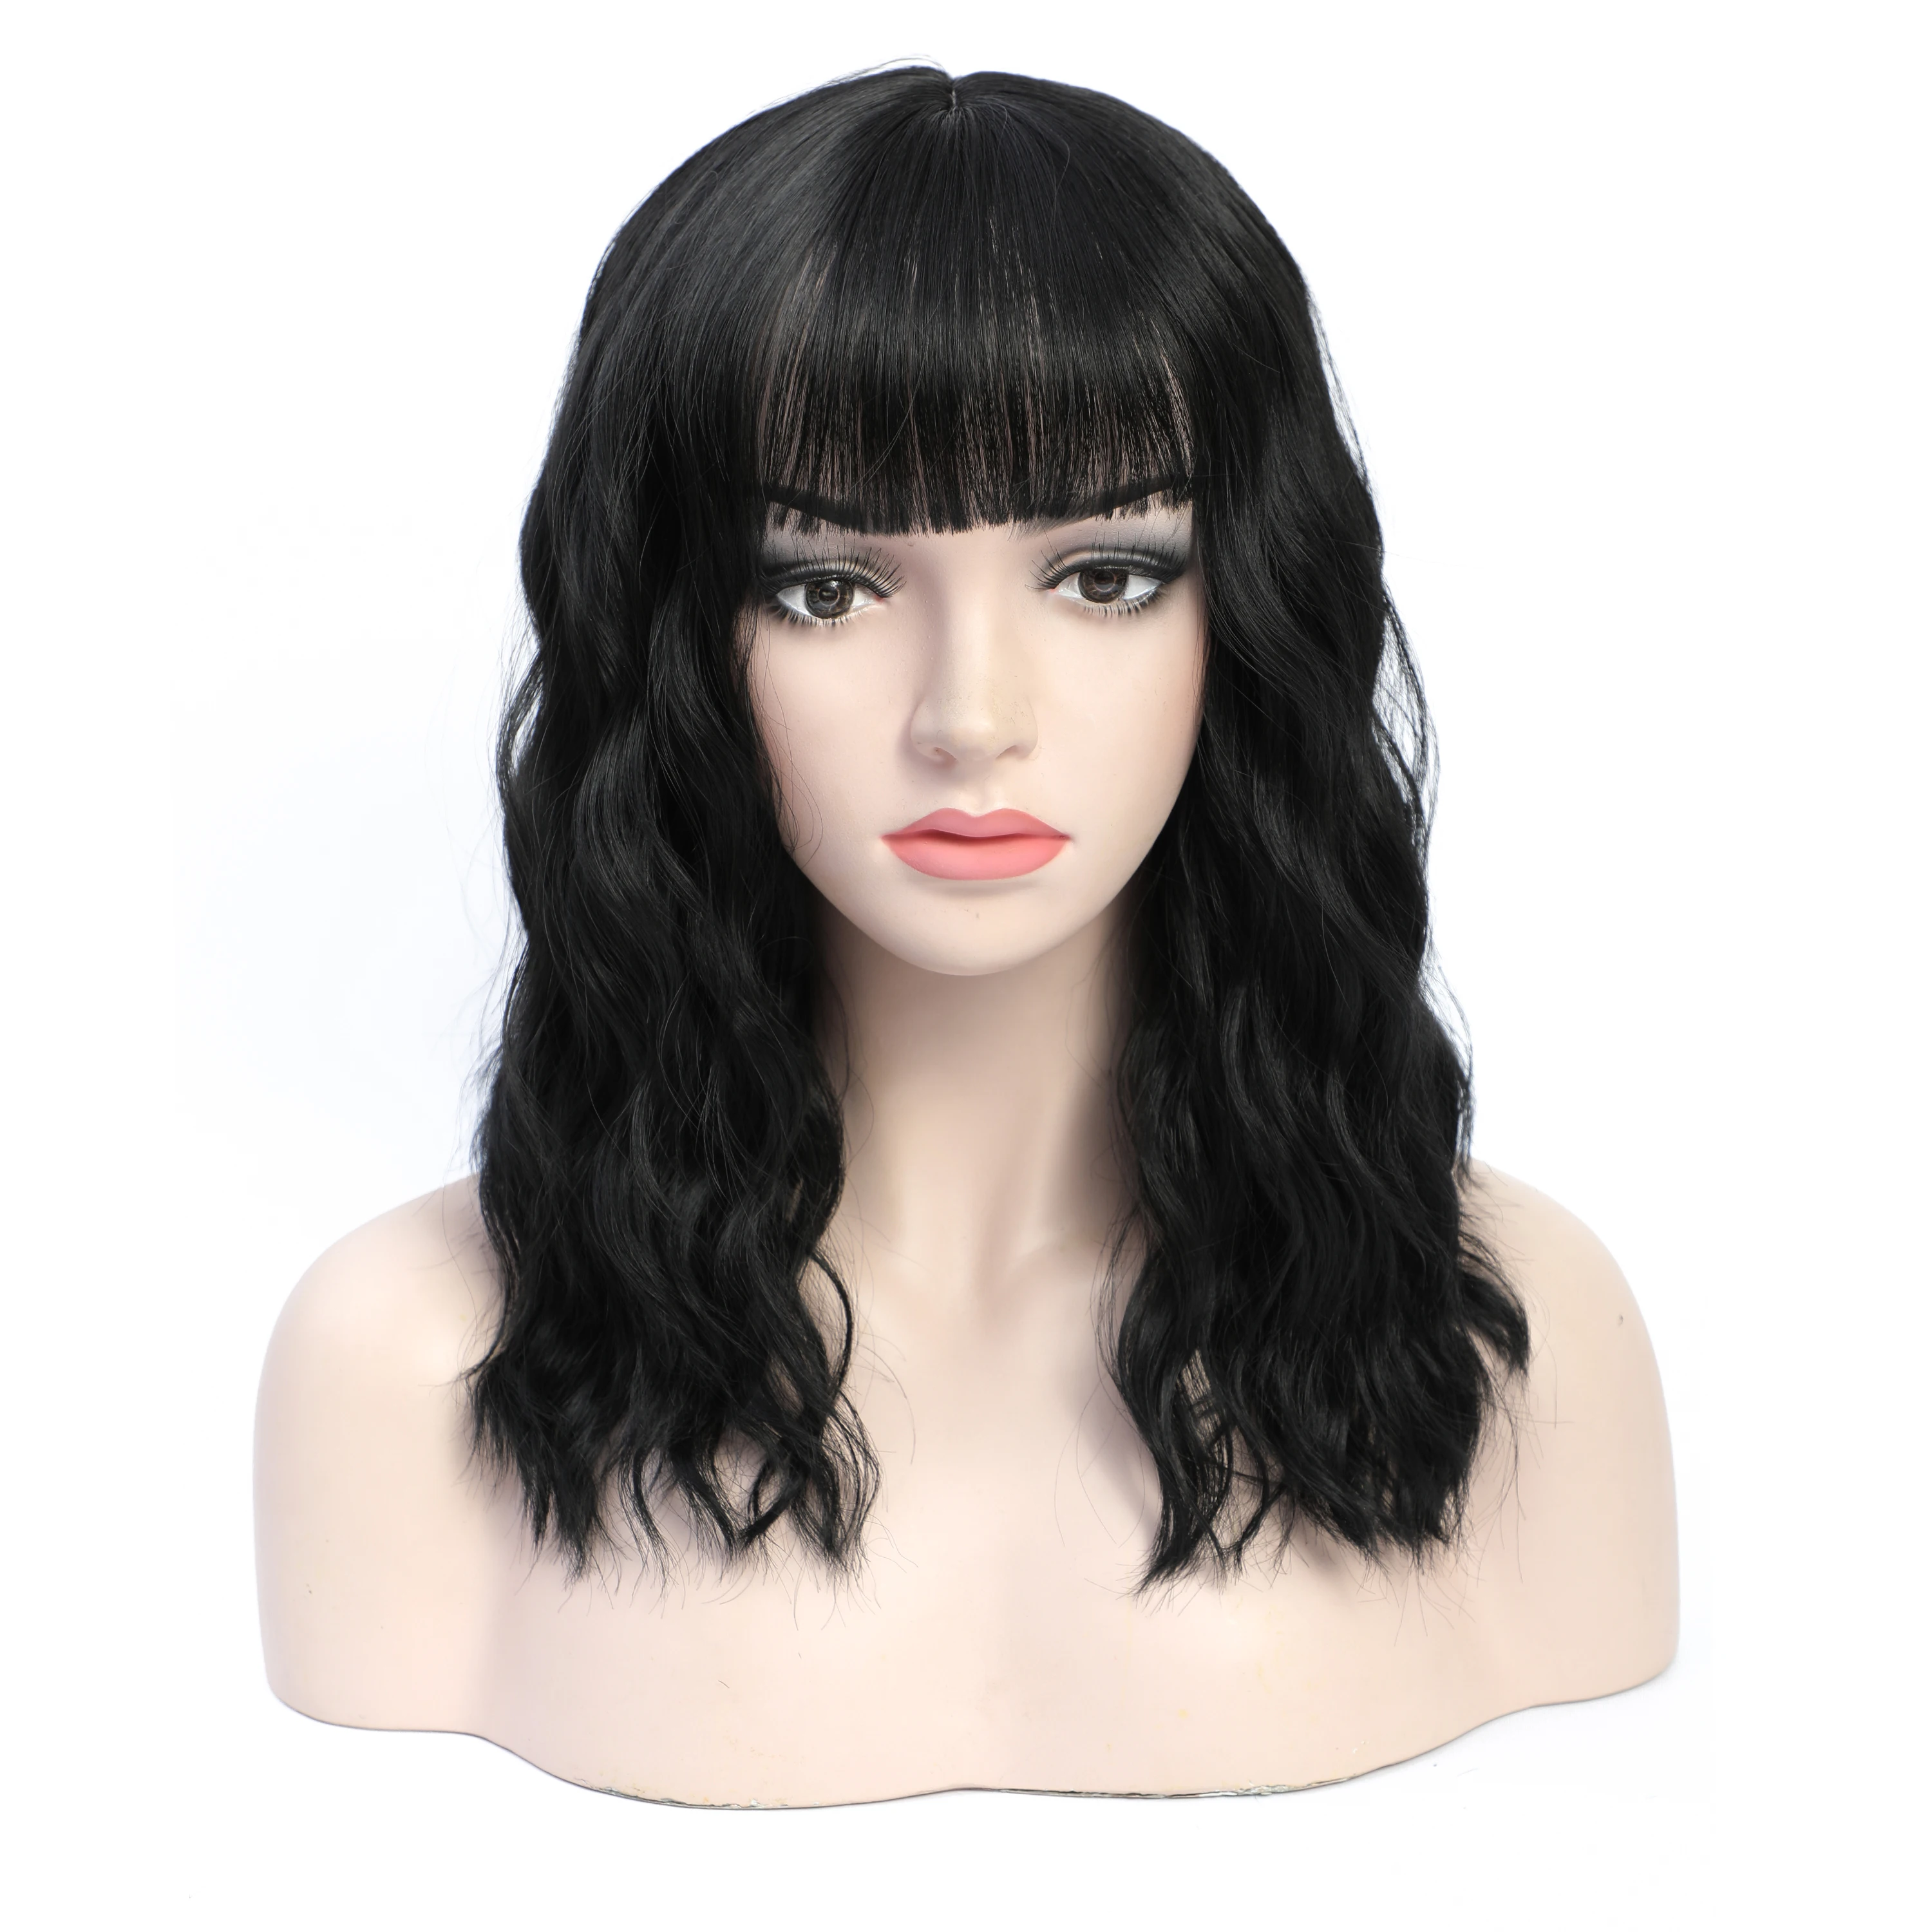 

LANYI 16Inches Long Wavy Wigs For Women Black Synthetic Wigs with Bangs For Femal Daily Use Cosplay Lolita Wigs Heat Resistant